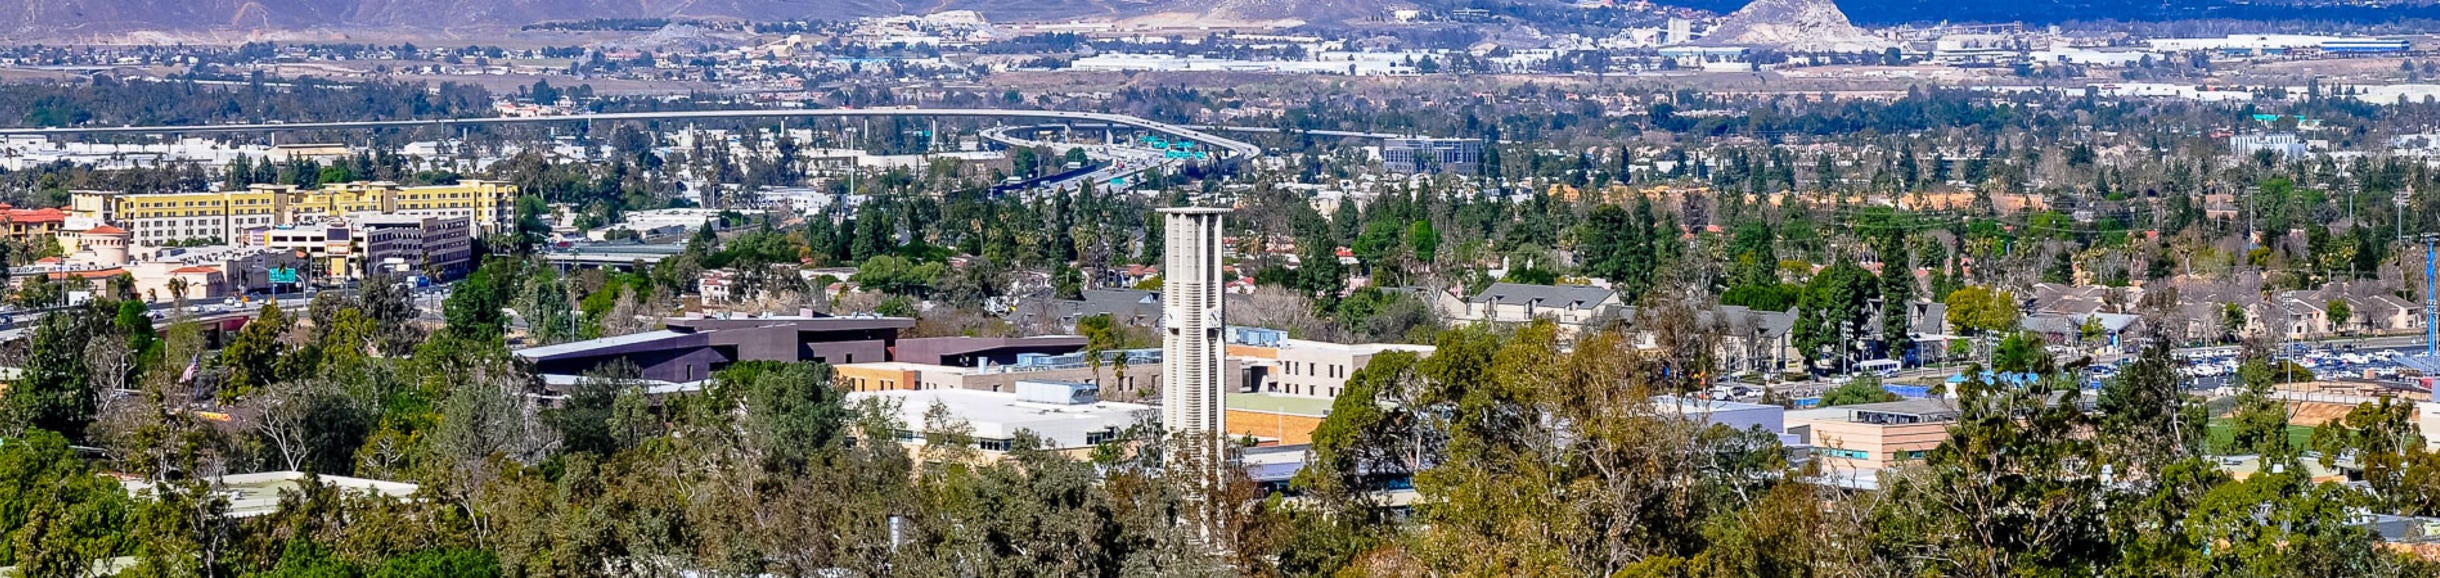 Panoramic view of UCR campus, iconic Bell Tower and surrounding City of Riverside.